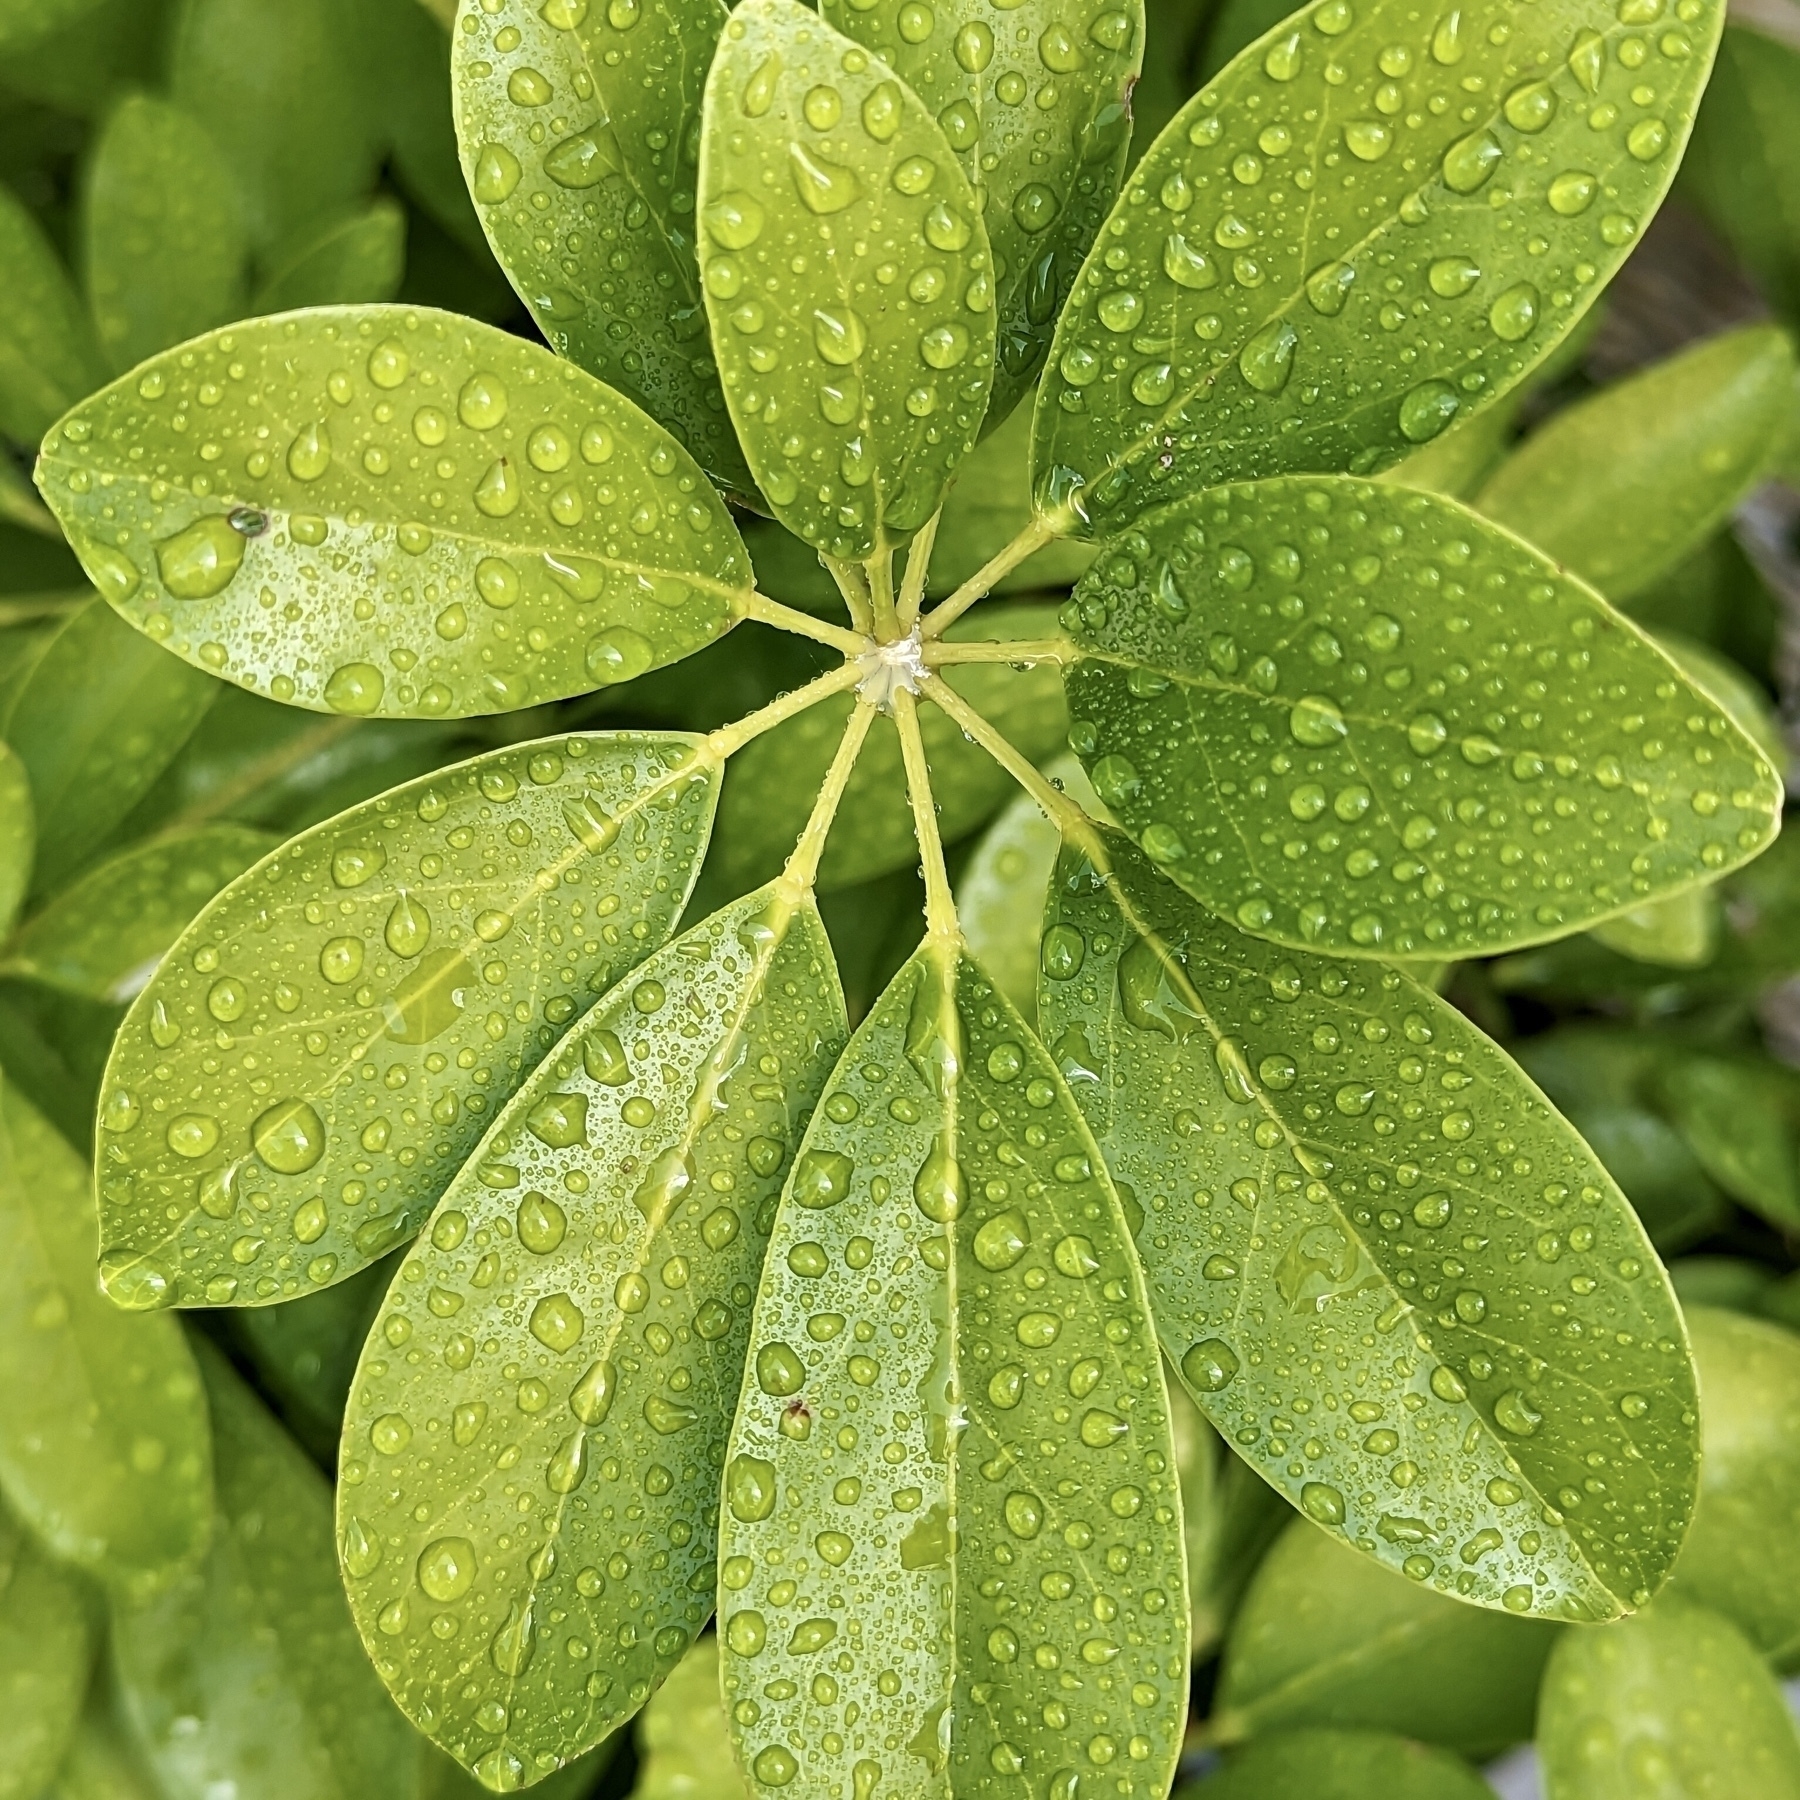 A rosette of umbrella plant leaves in close-up, with water droplets on each leaf.